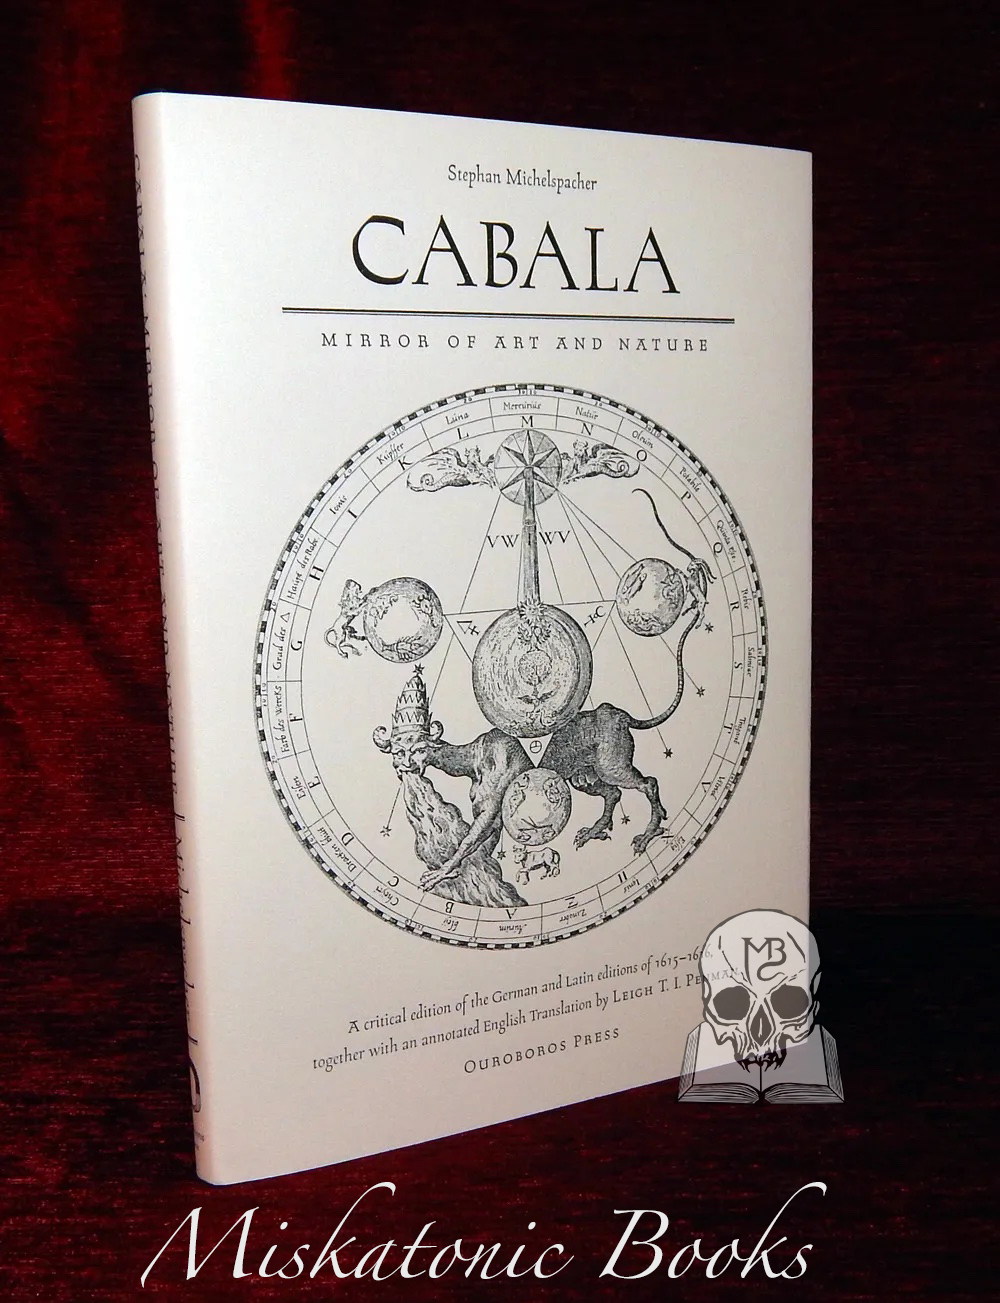 CABALA: Mirror of Art and Nature by Stephan Michelspacher - Limited Edition Hardcover - (Small Pencil Mark on Cover)